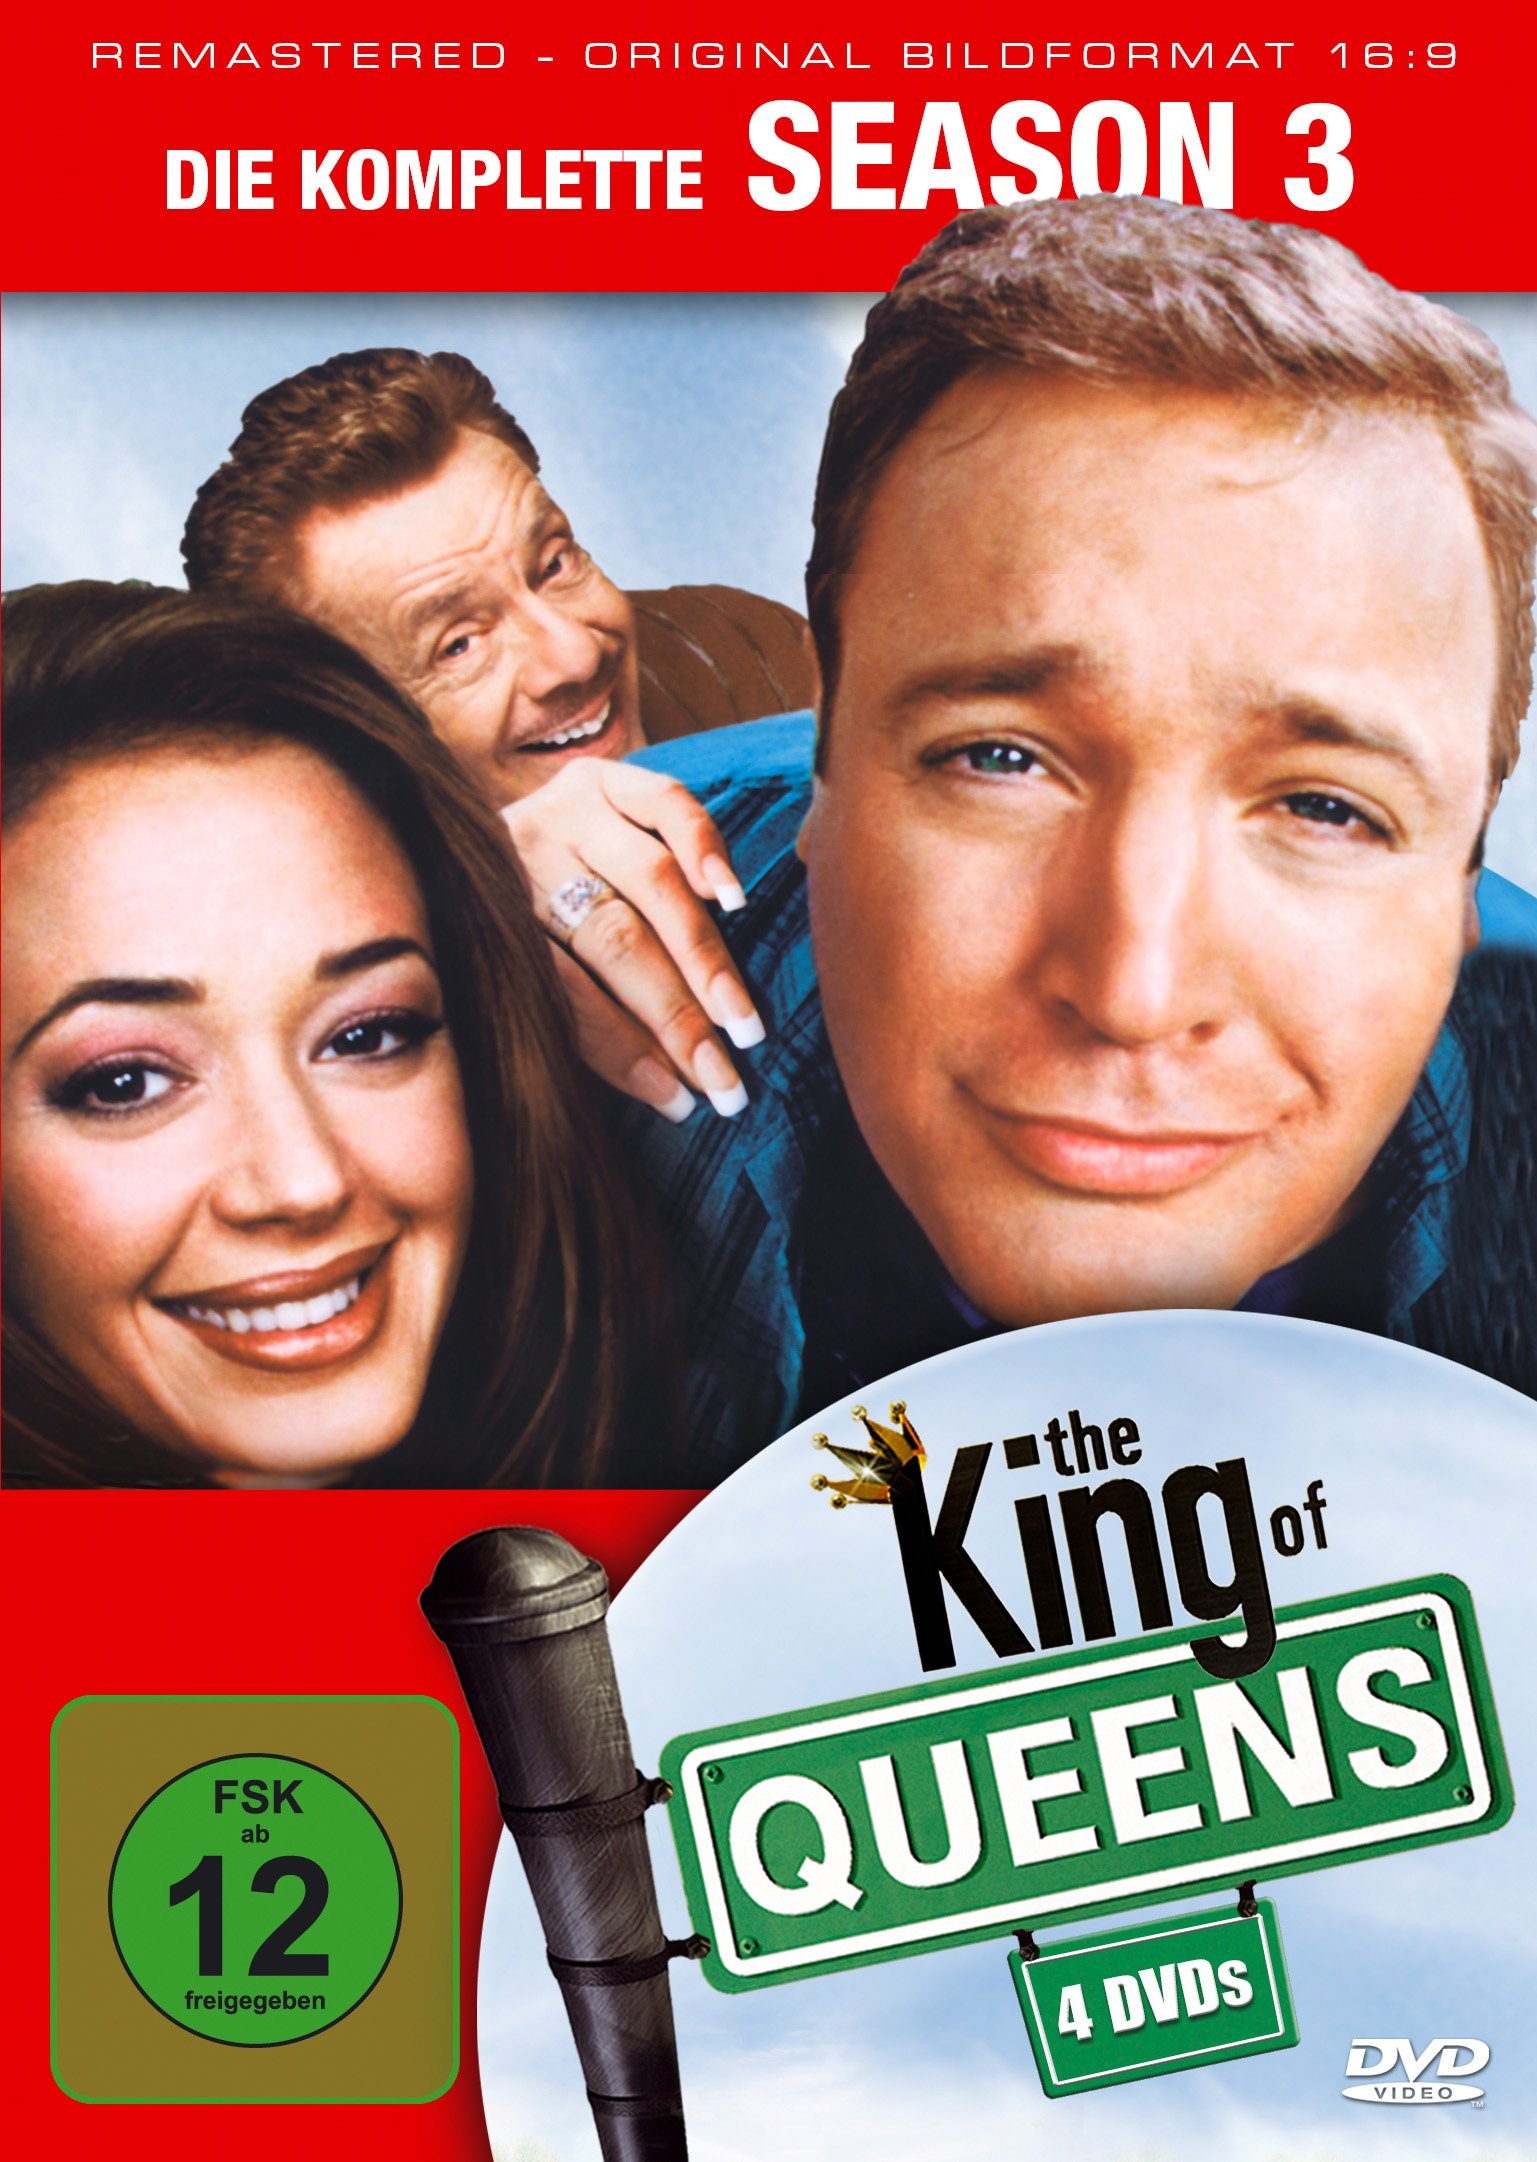 The King of Queens - Season 3 - Remastered [4 DVDs]